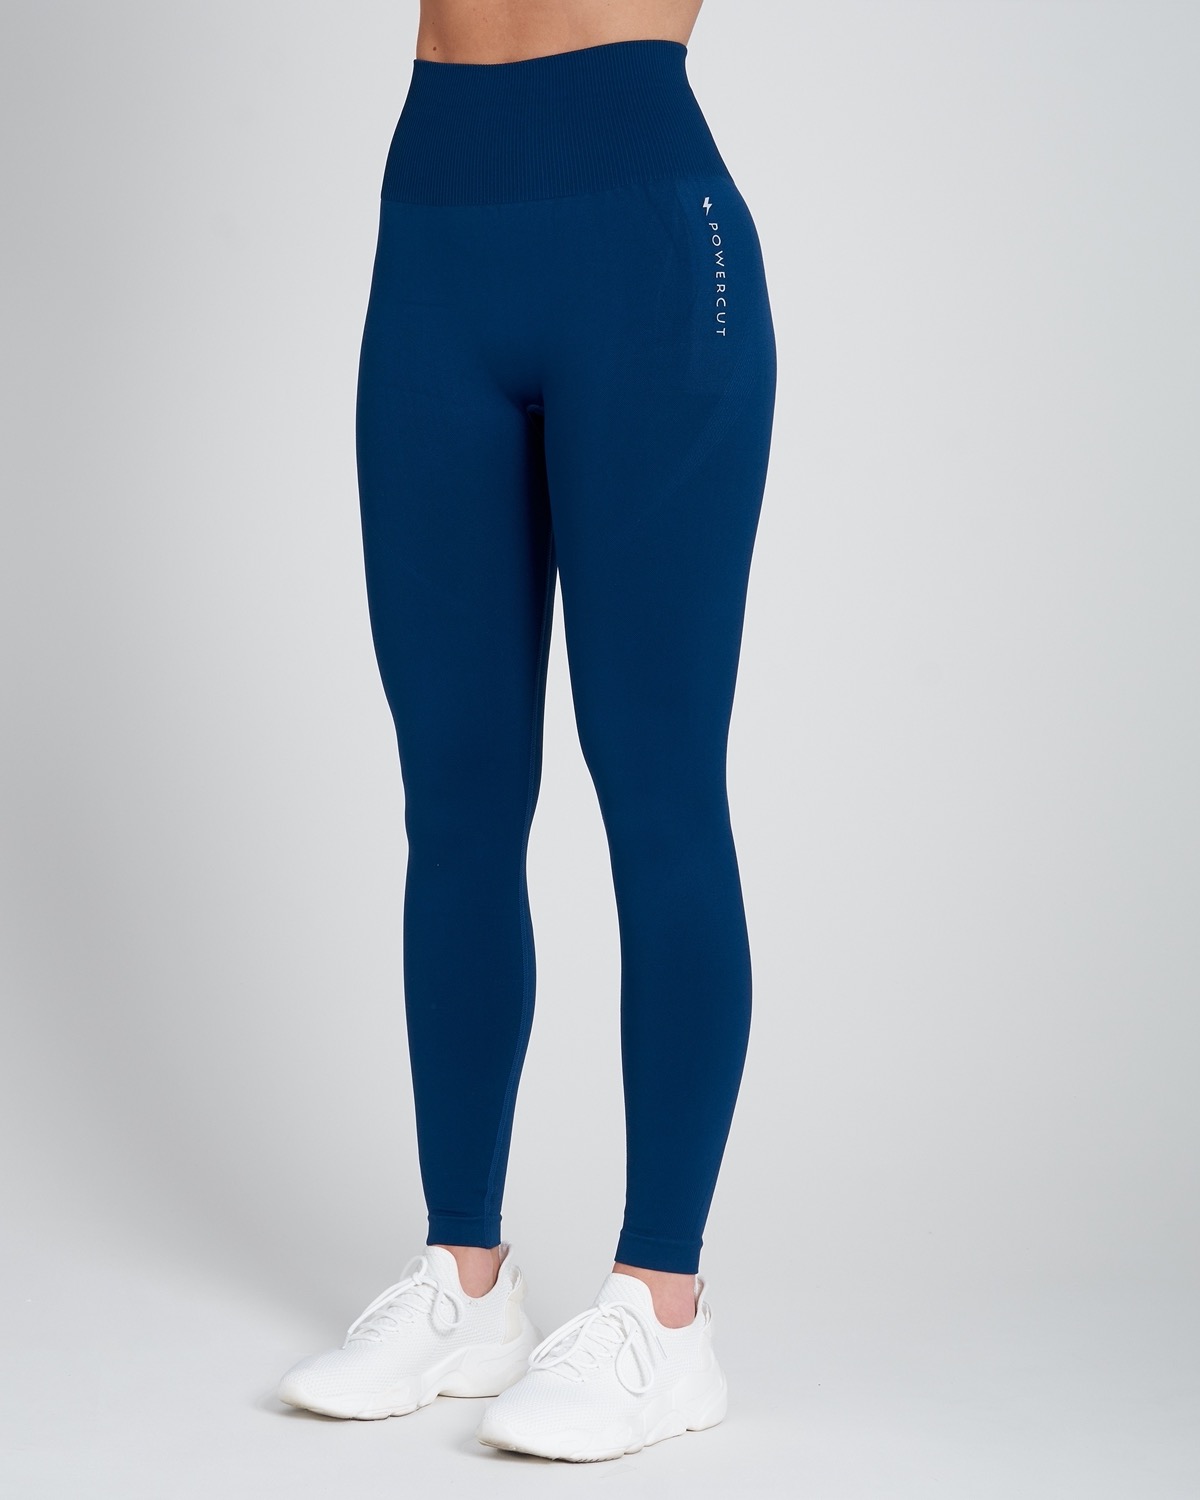 https://dunnes.btxmedia.com/pws/client/images/catalogue/products/1551111/zoom/1551111_navy.jpg